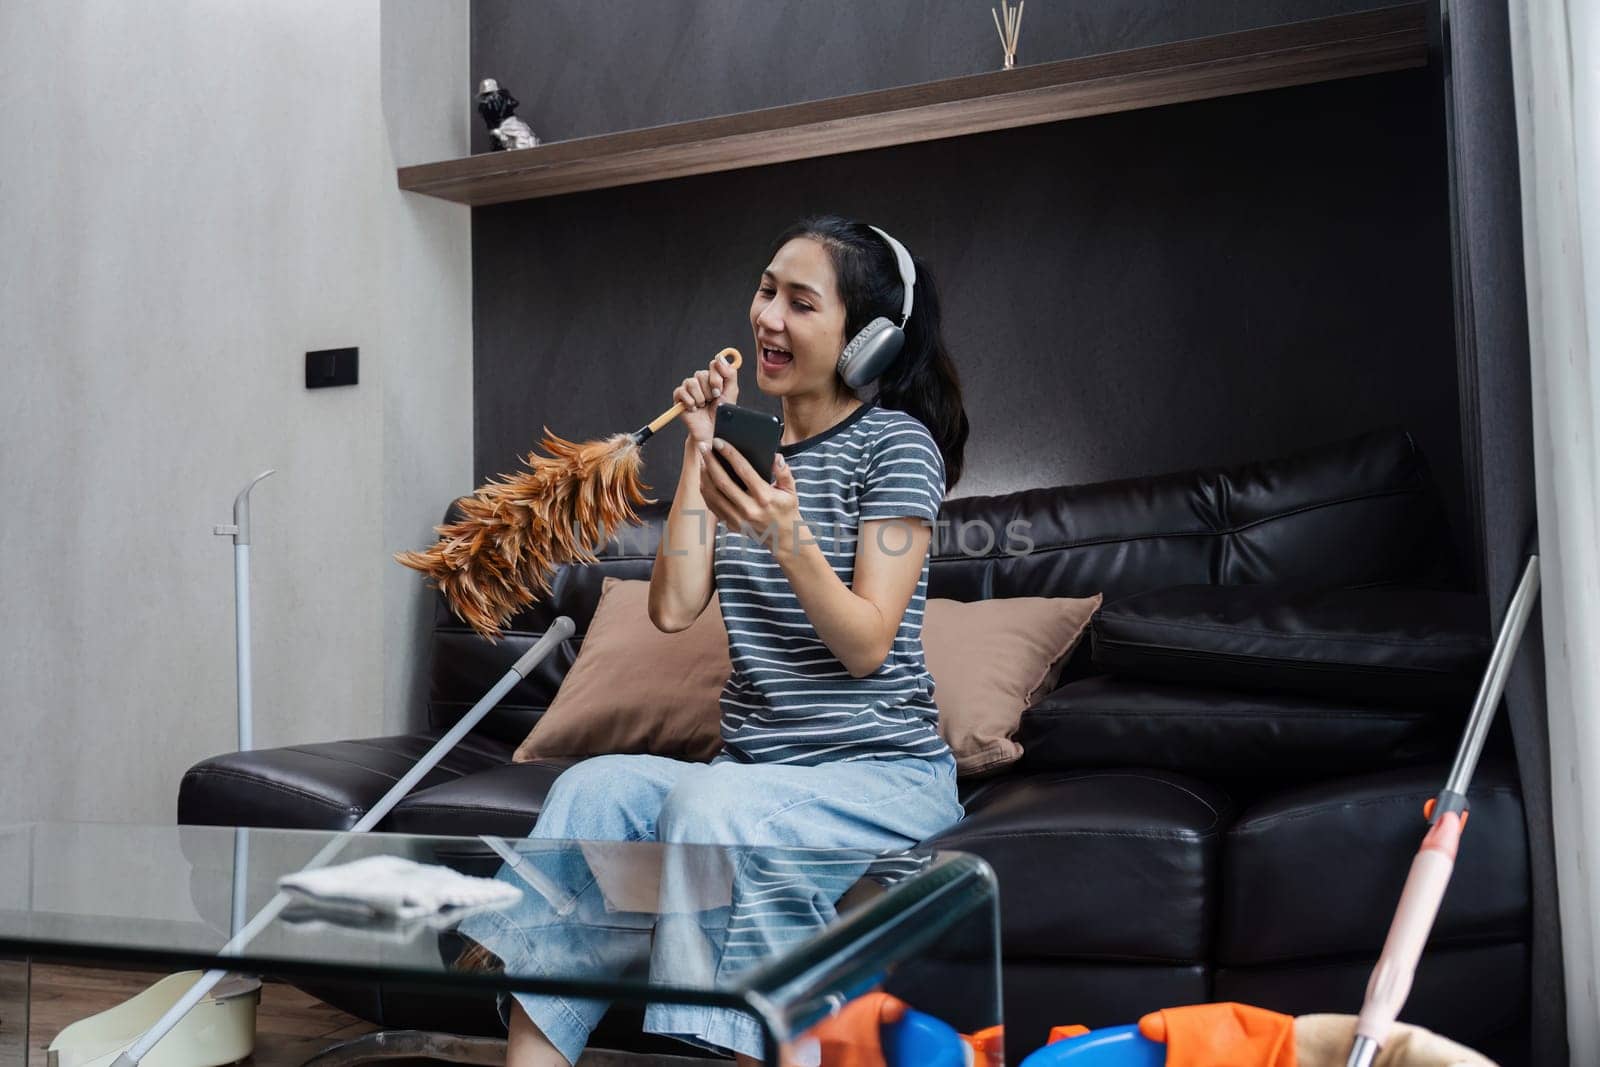 Funny woman Asian teenage cleaning house, doing housework, cleaning the floor with duster and listening to music in wireless headphones.